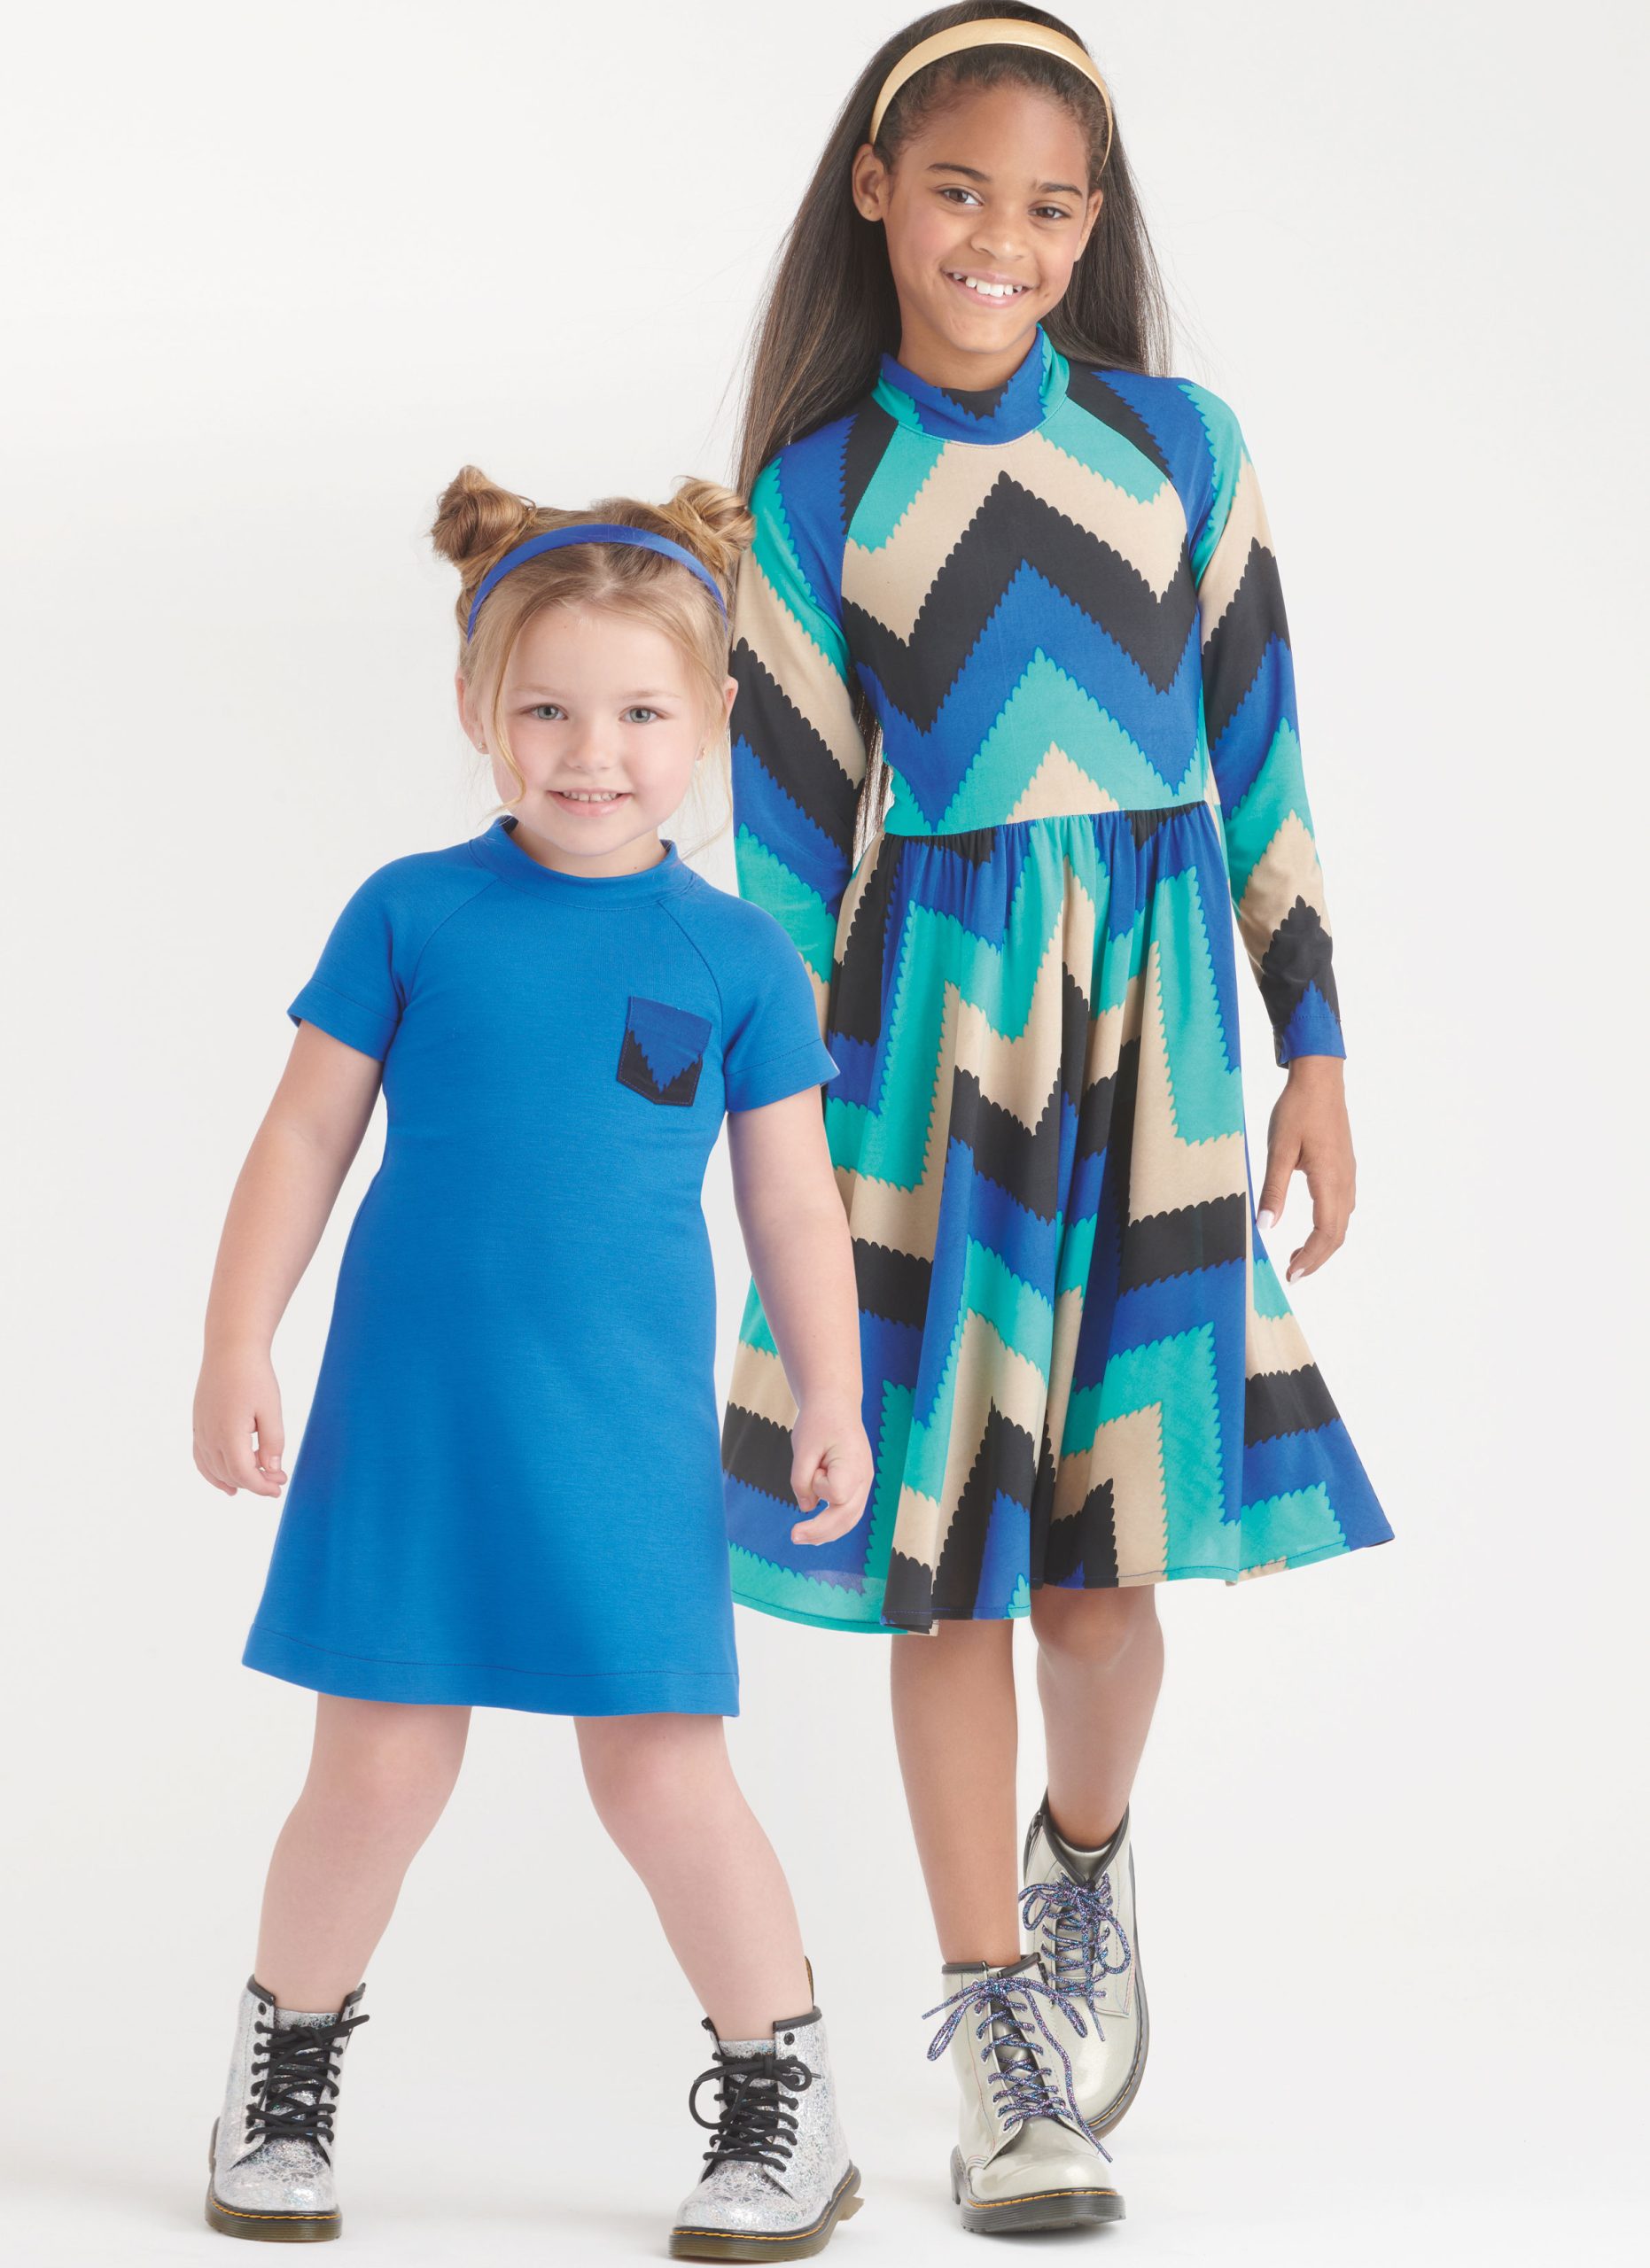 New Look Child/Teen Knit Dresses N6773 - The Fold Line